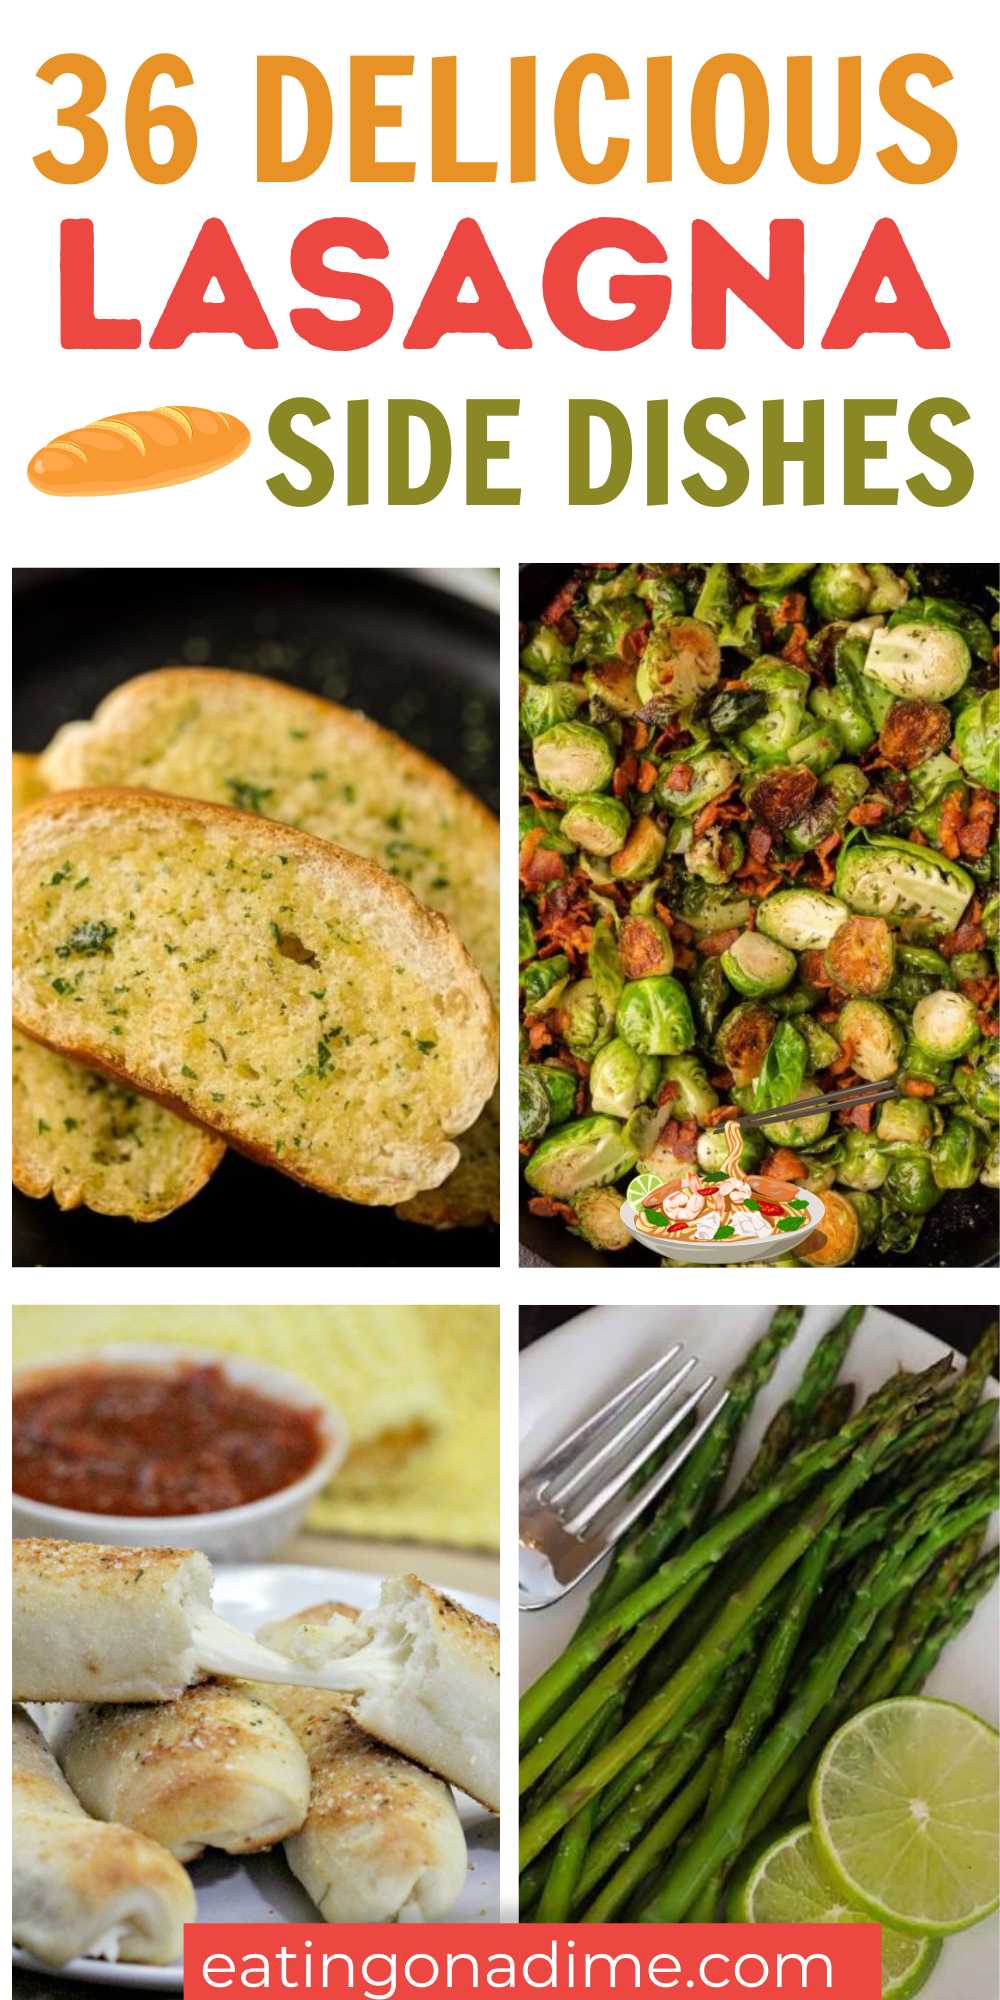 Make the best side dishes for lasagna that are easy and tasty. Learn 55 lasagna side dishes that will complete your meal. These easy side dish ideas will jazz up your lasagna dinner. Whether you want something light, something heavy, or something healthy, we have something for everyone. #eatingonadime #sidedishesforlasagna #lasagnasidedishes